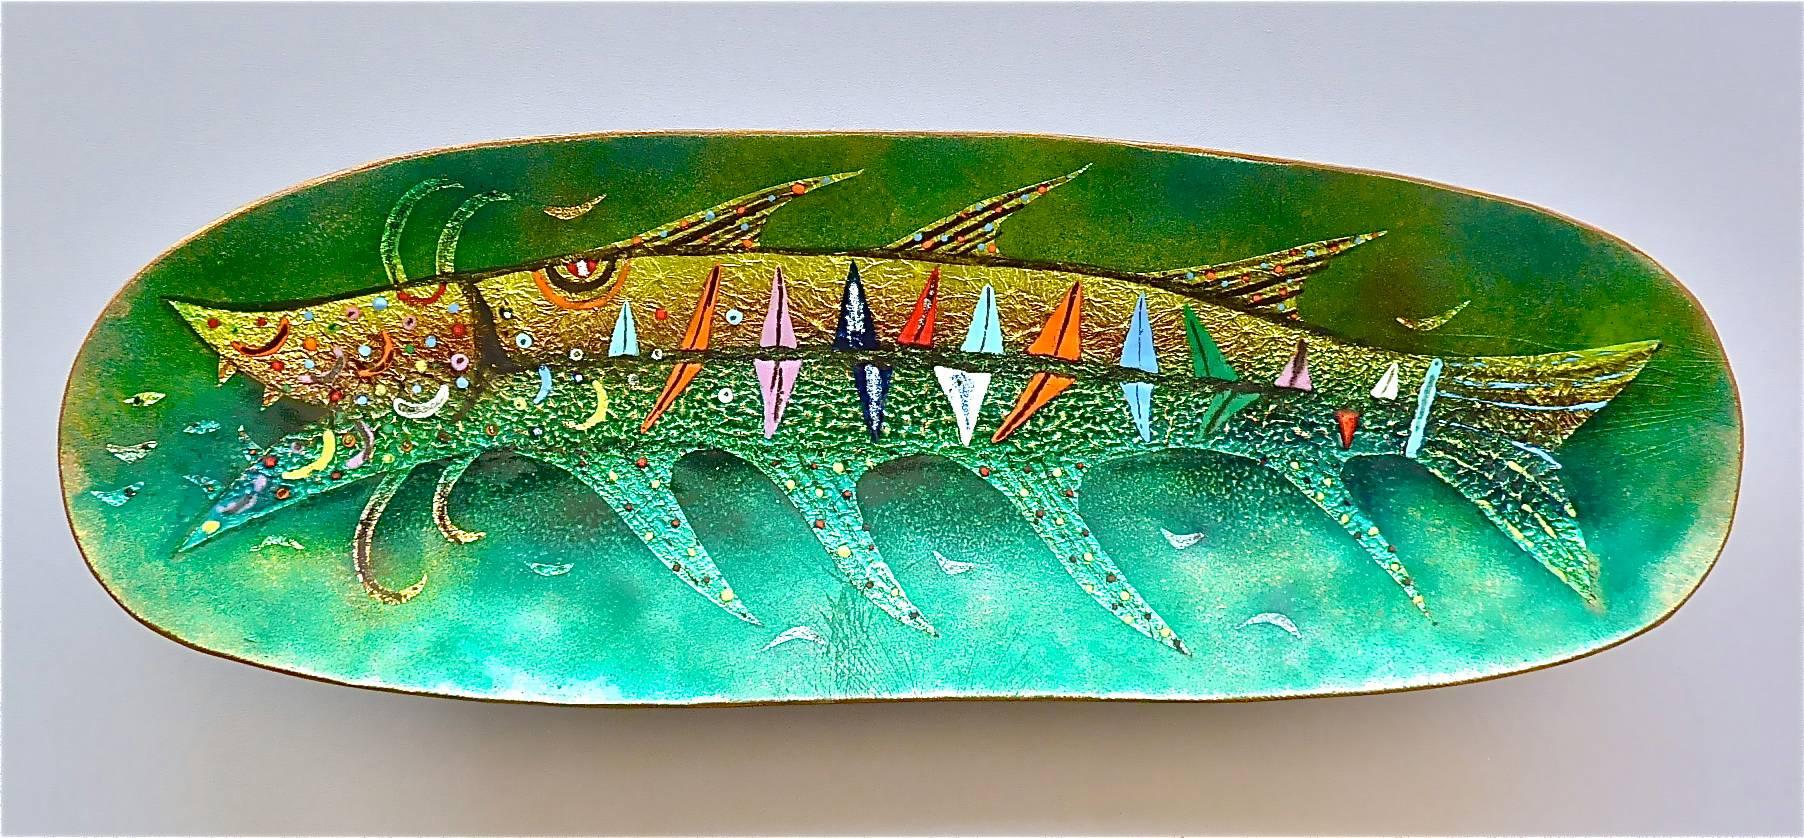 Large Green Colorful Enamel on Copper Fish Bowl De Poli or circle, Italy, 1950s 3